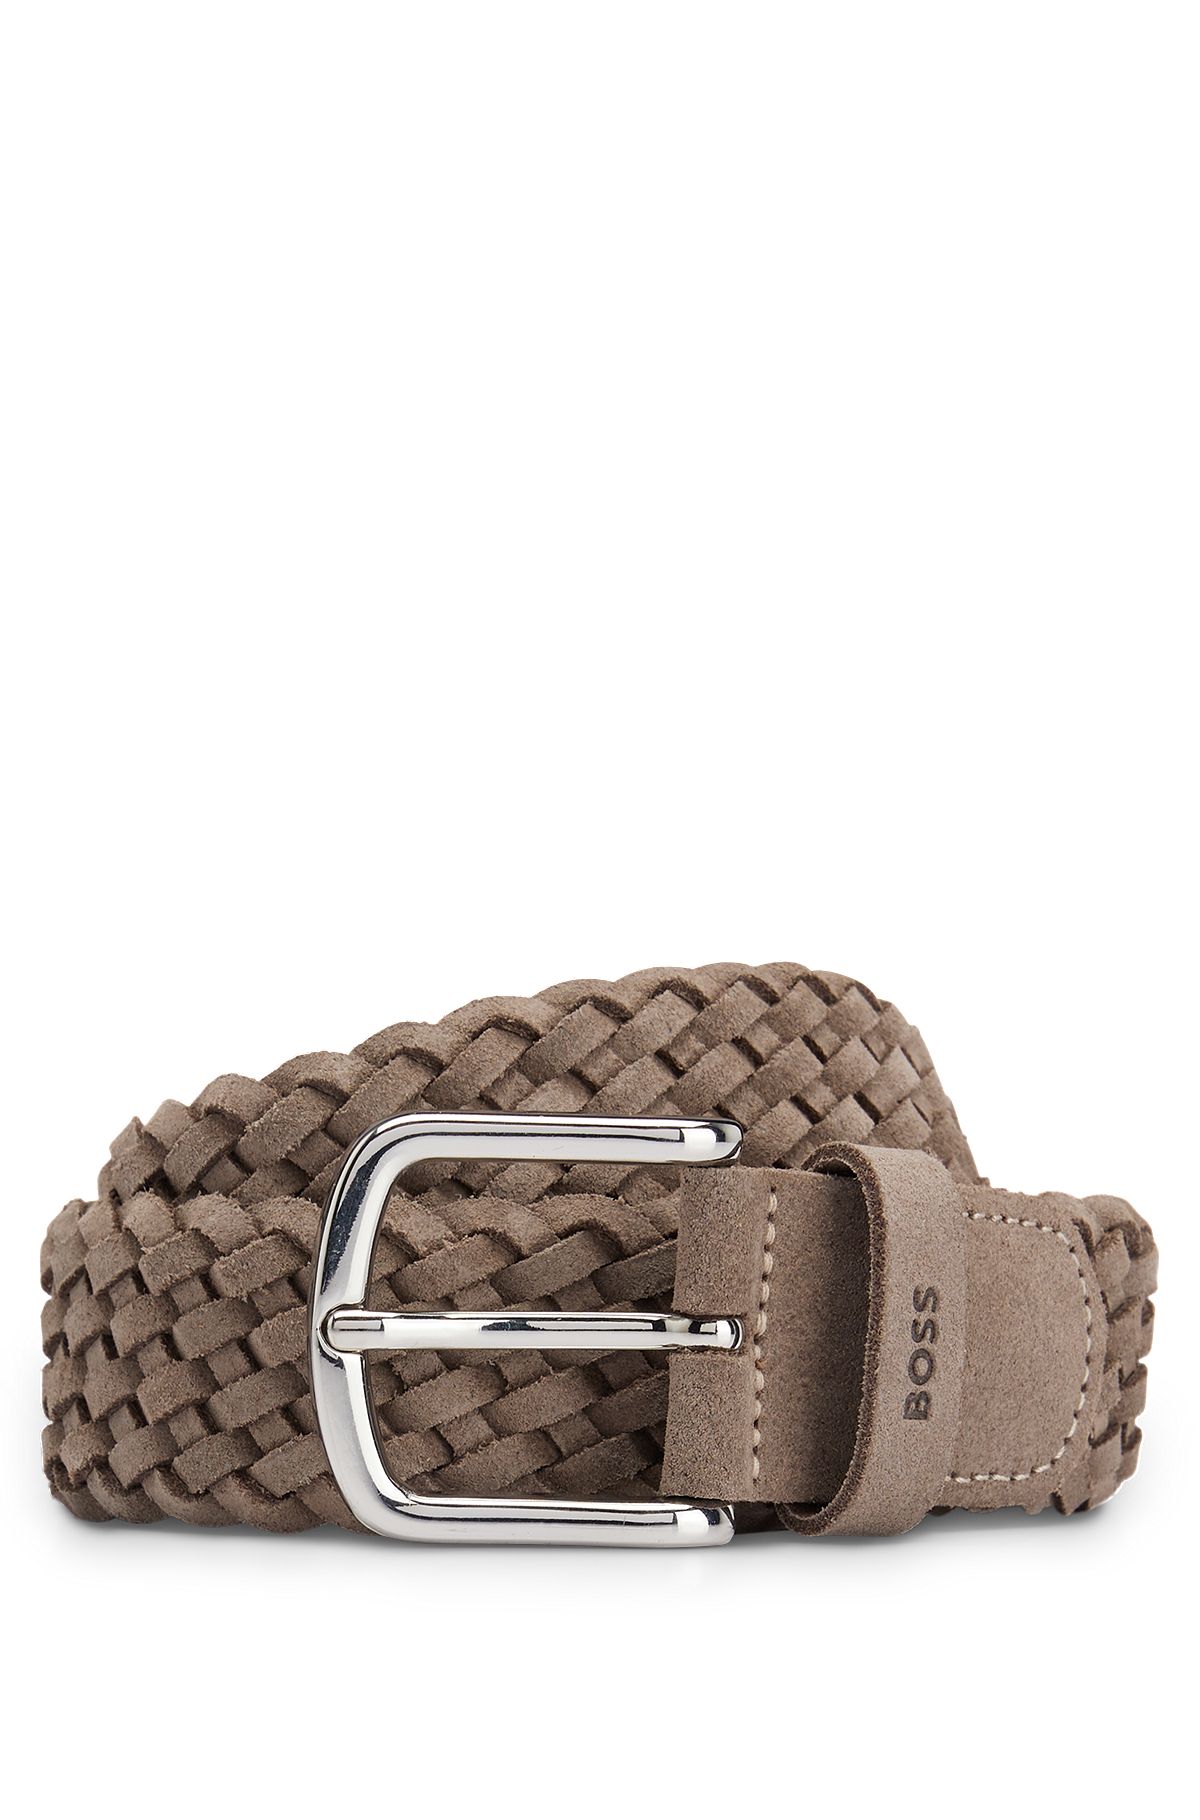 Branded-keeper belt in woven suede with polished buckle, Khaki